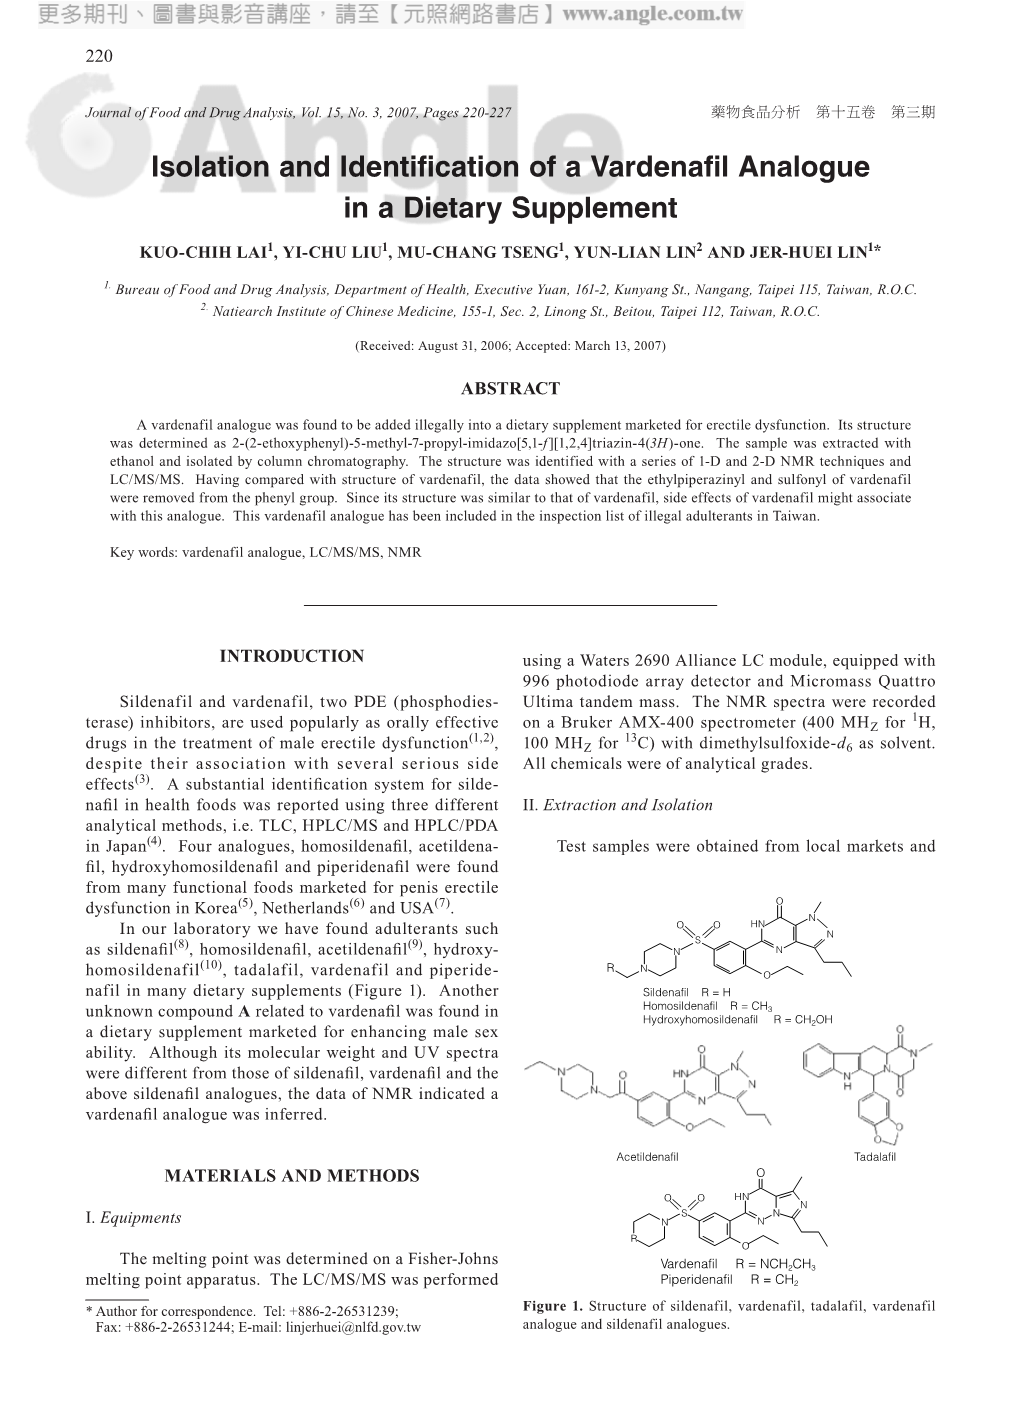 Isolation and Identification of a Vardenafil Analogue in a Dietary Supplement